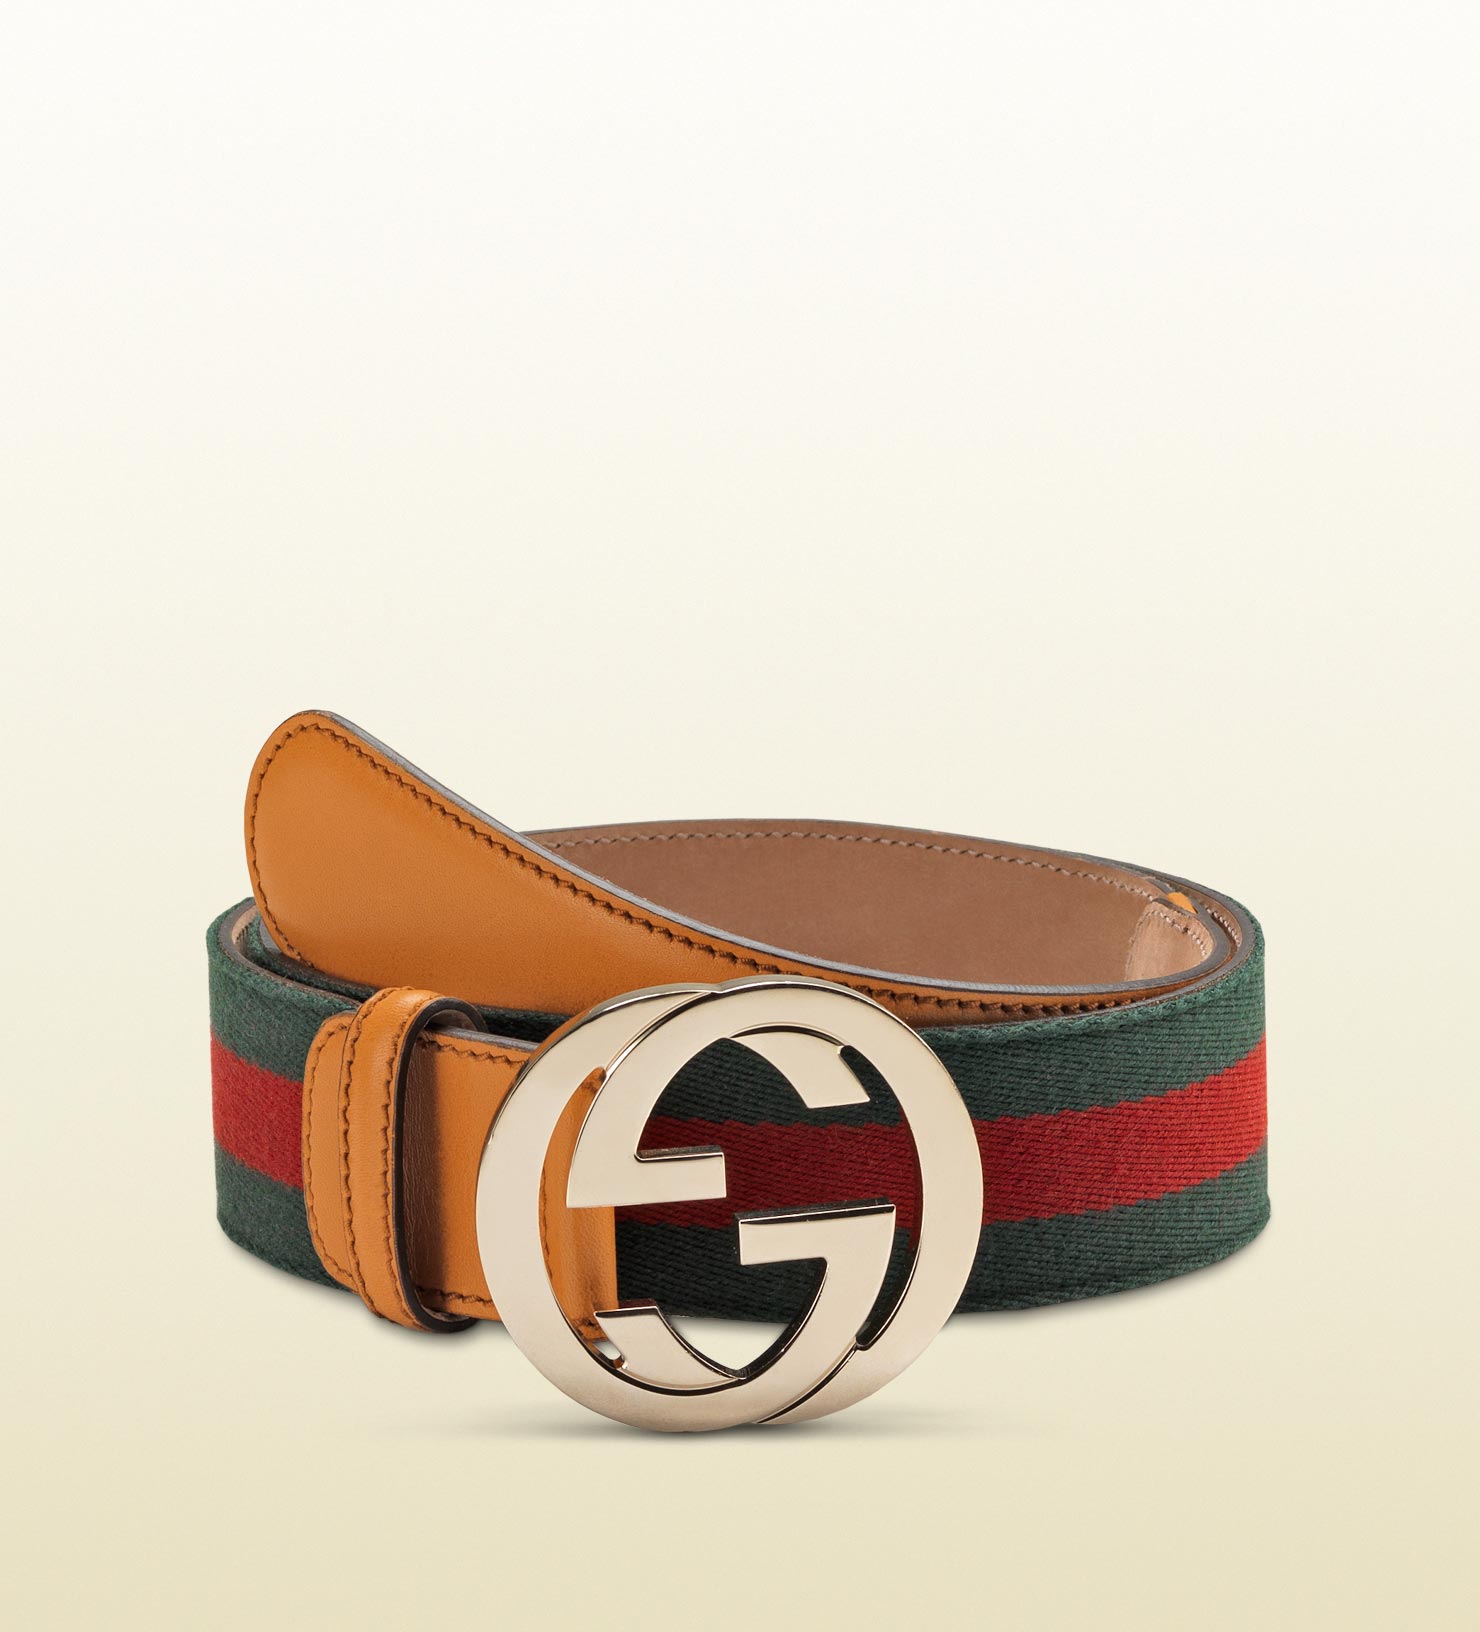 Lyst - Gucci Signature Web Belt With Interlocking G Buckle in Green for Men